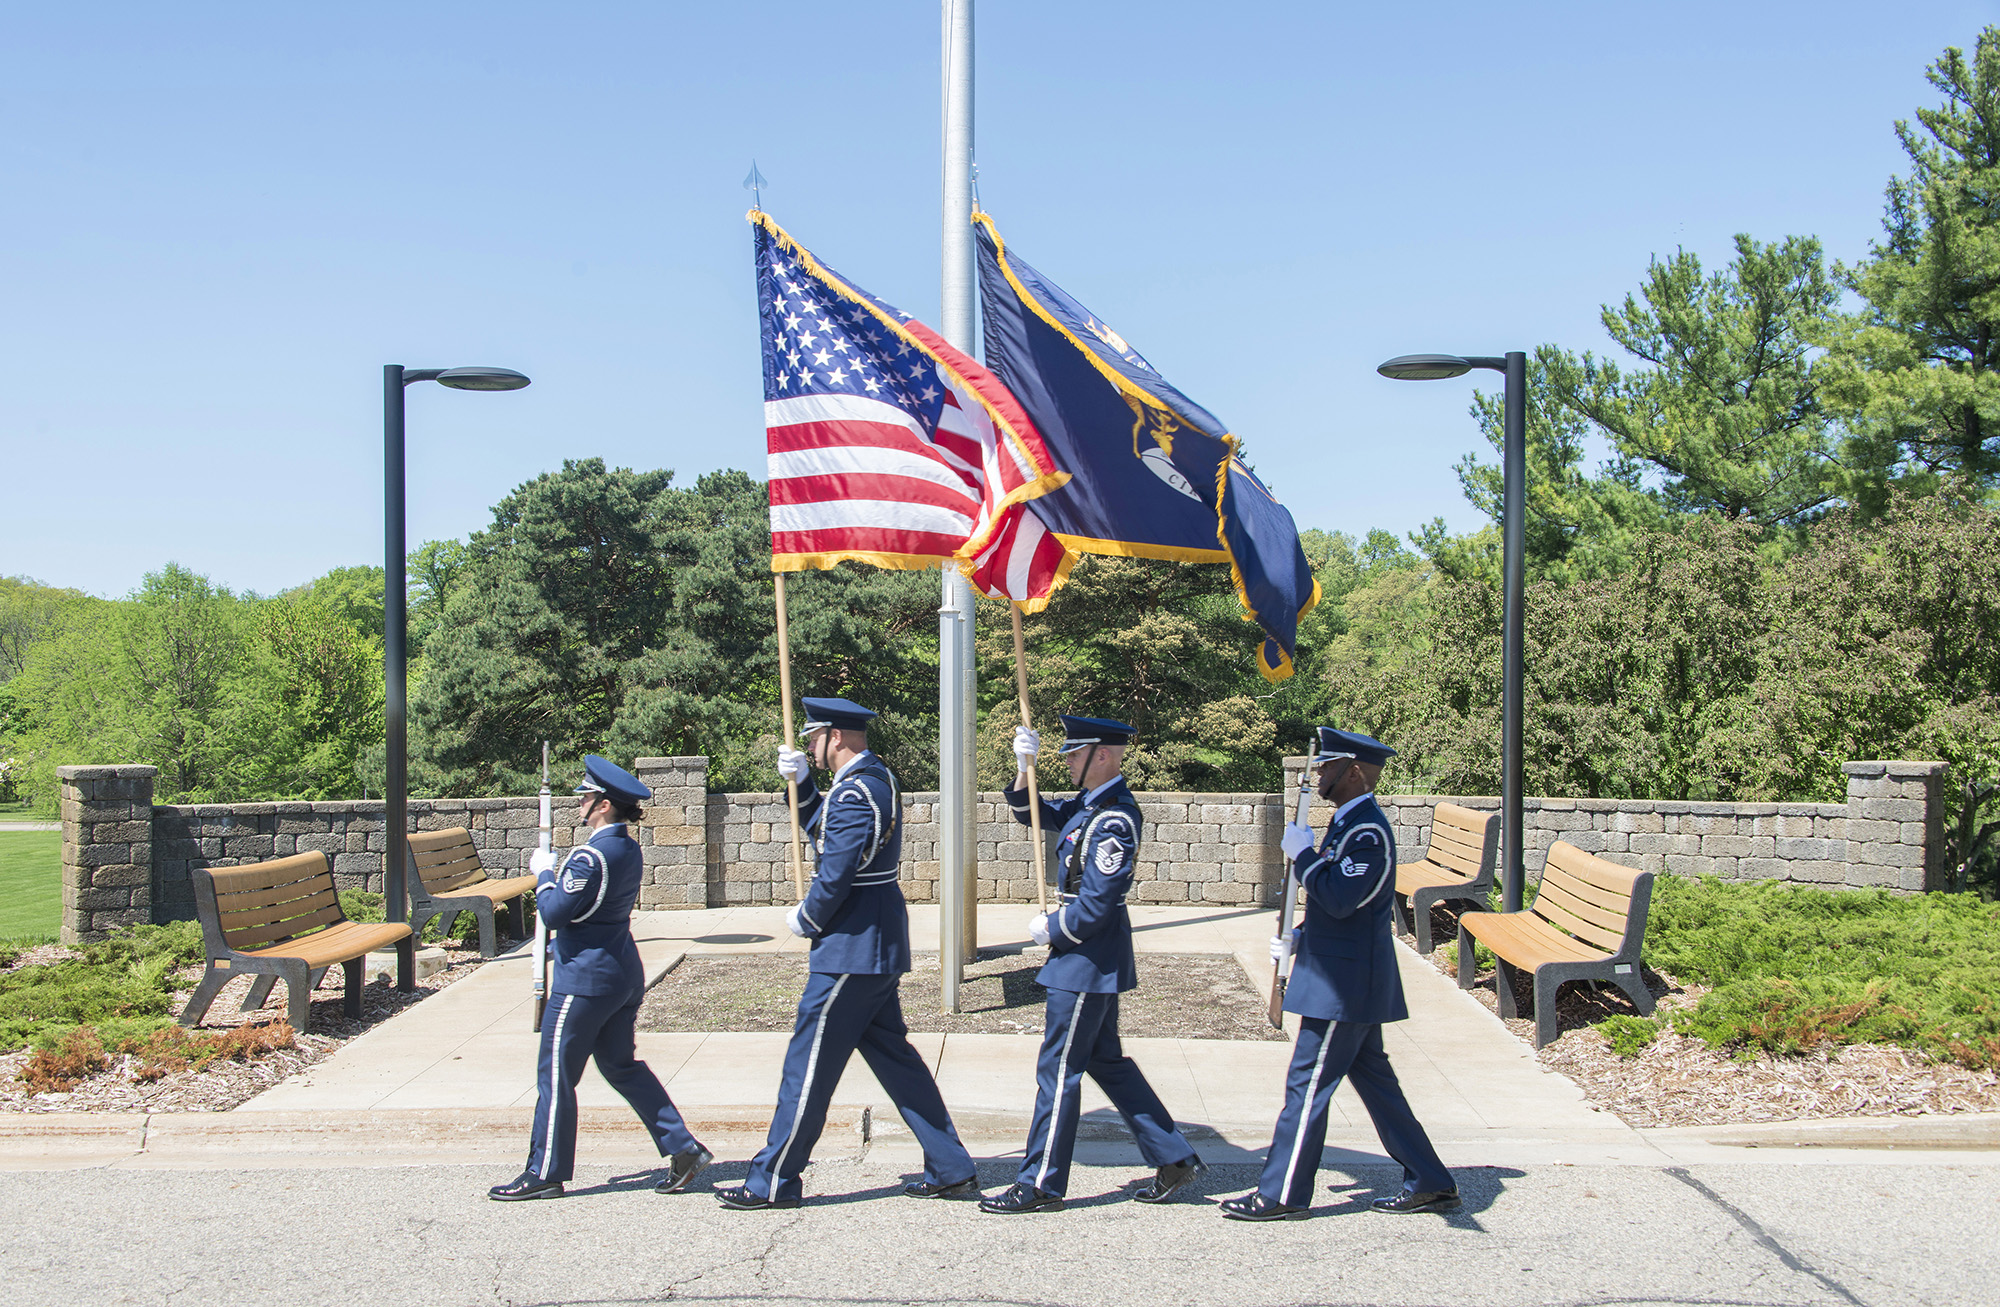 A military color guard carries the U.S. and Michigan flags during a Memorial Day event on campus.